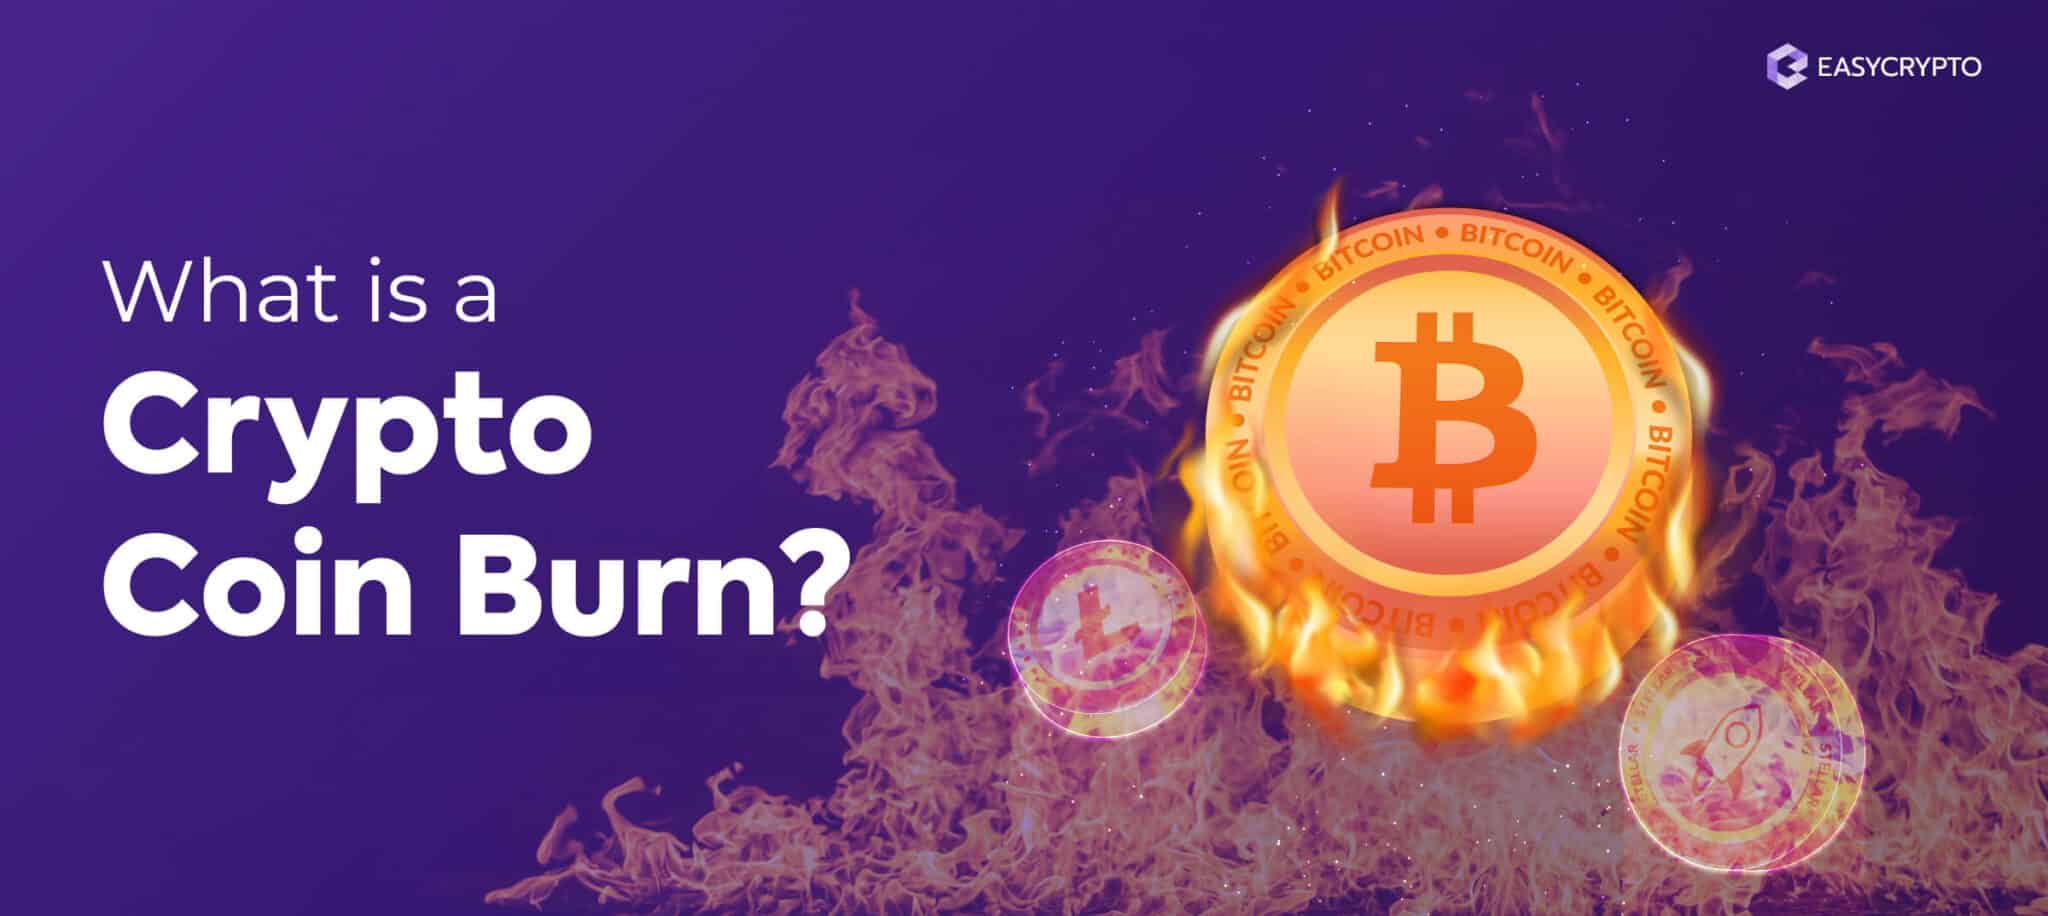 what happens when a crypto coin is burned